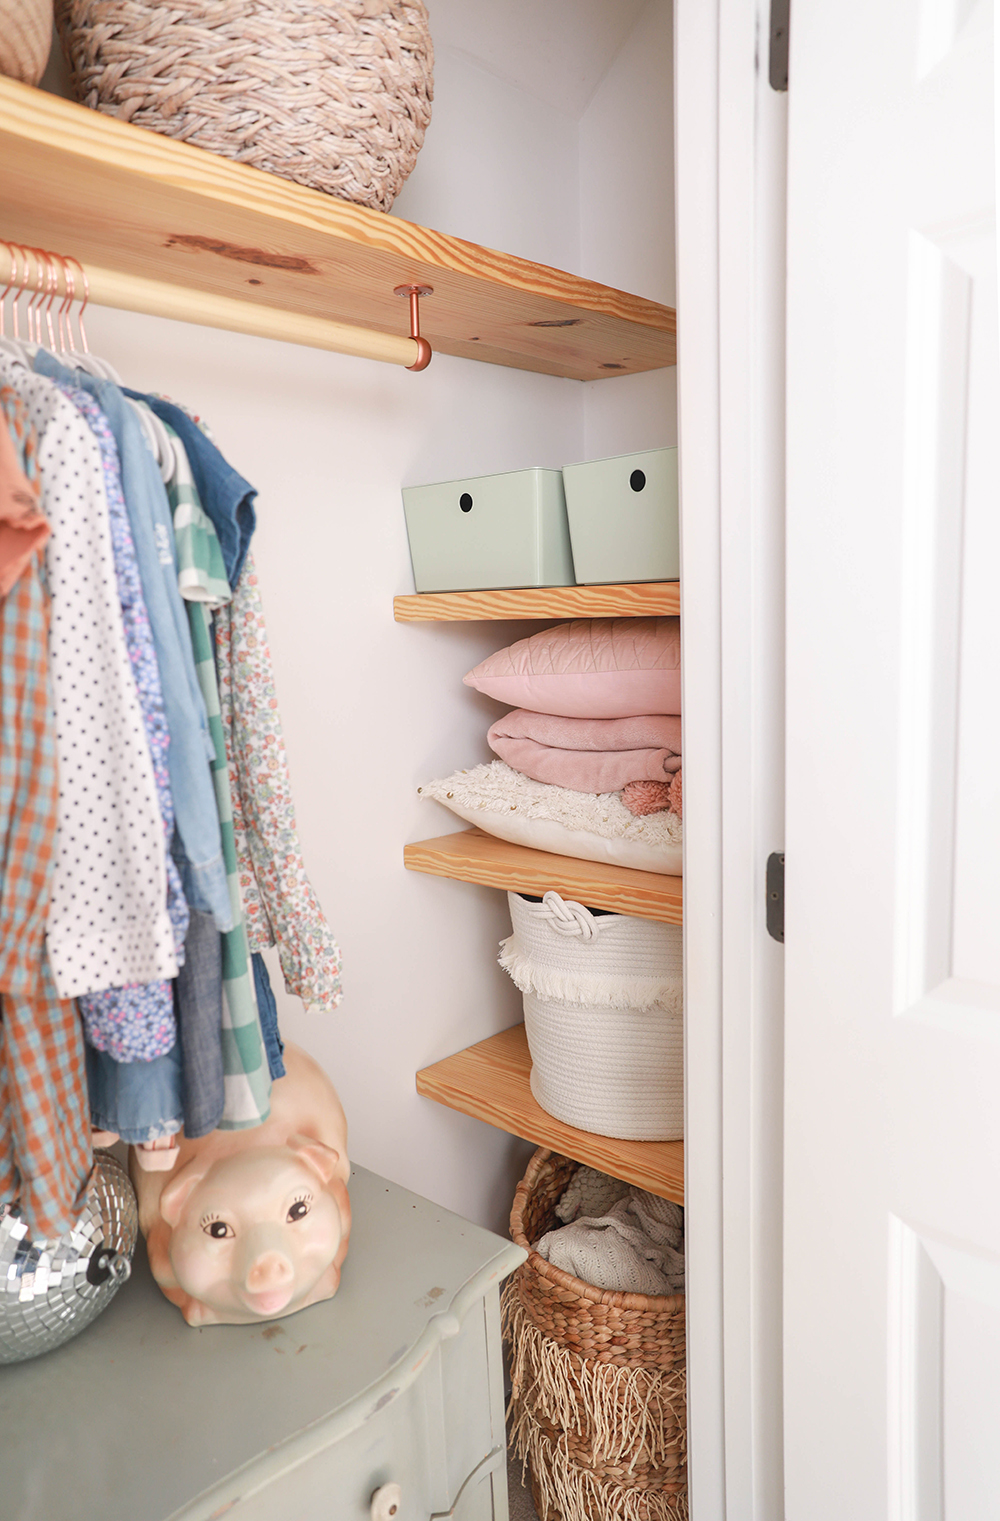 Diy Floating Wood Shelves Clothing, Can You Spray Paint Closet Shelves